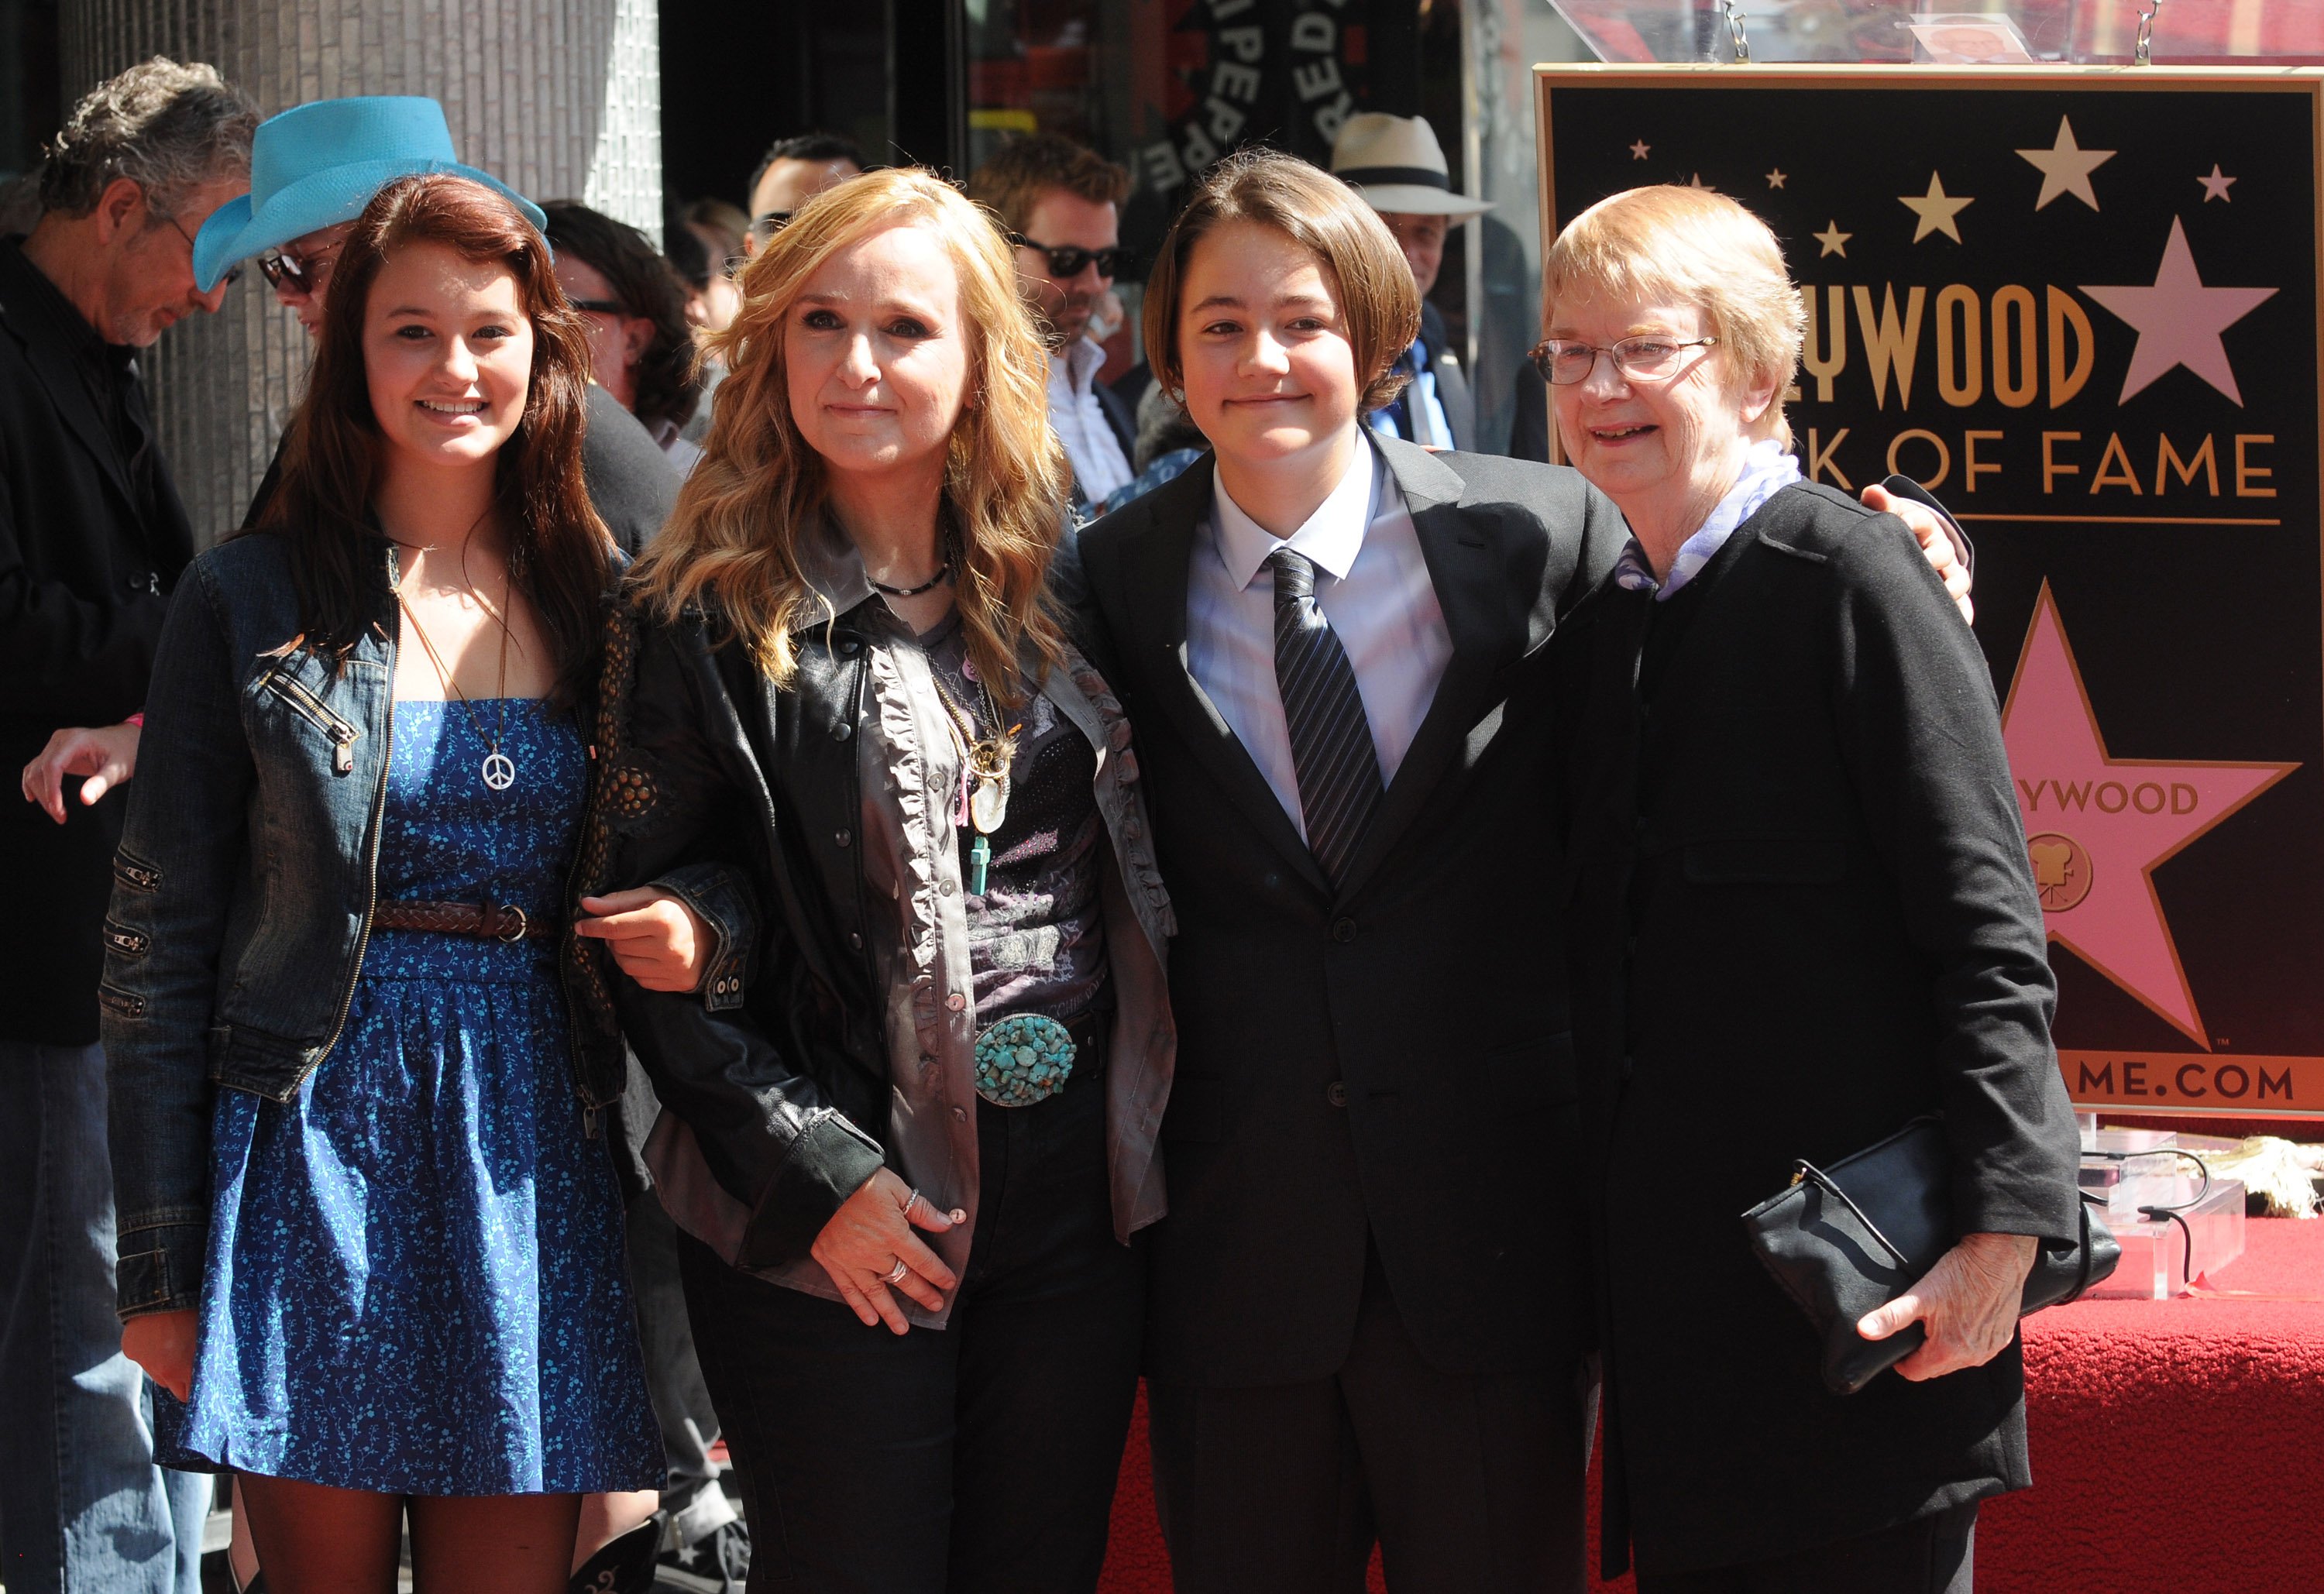 Bailey Cypher, Melissa Etheridge, Beckett Cypher and Elizabeth Williamson attend Melissa Etheridge's Hollywood Walk of Fame Induction Ceremony on September 27, 2011 in Hollywood, California. | Photo: GettyImages